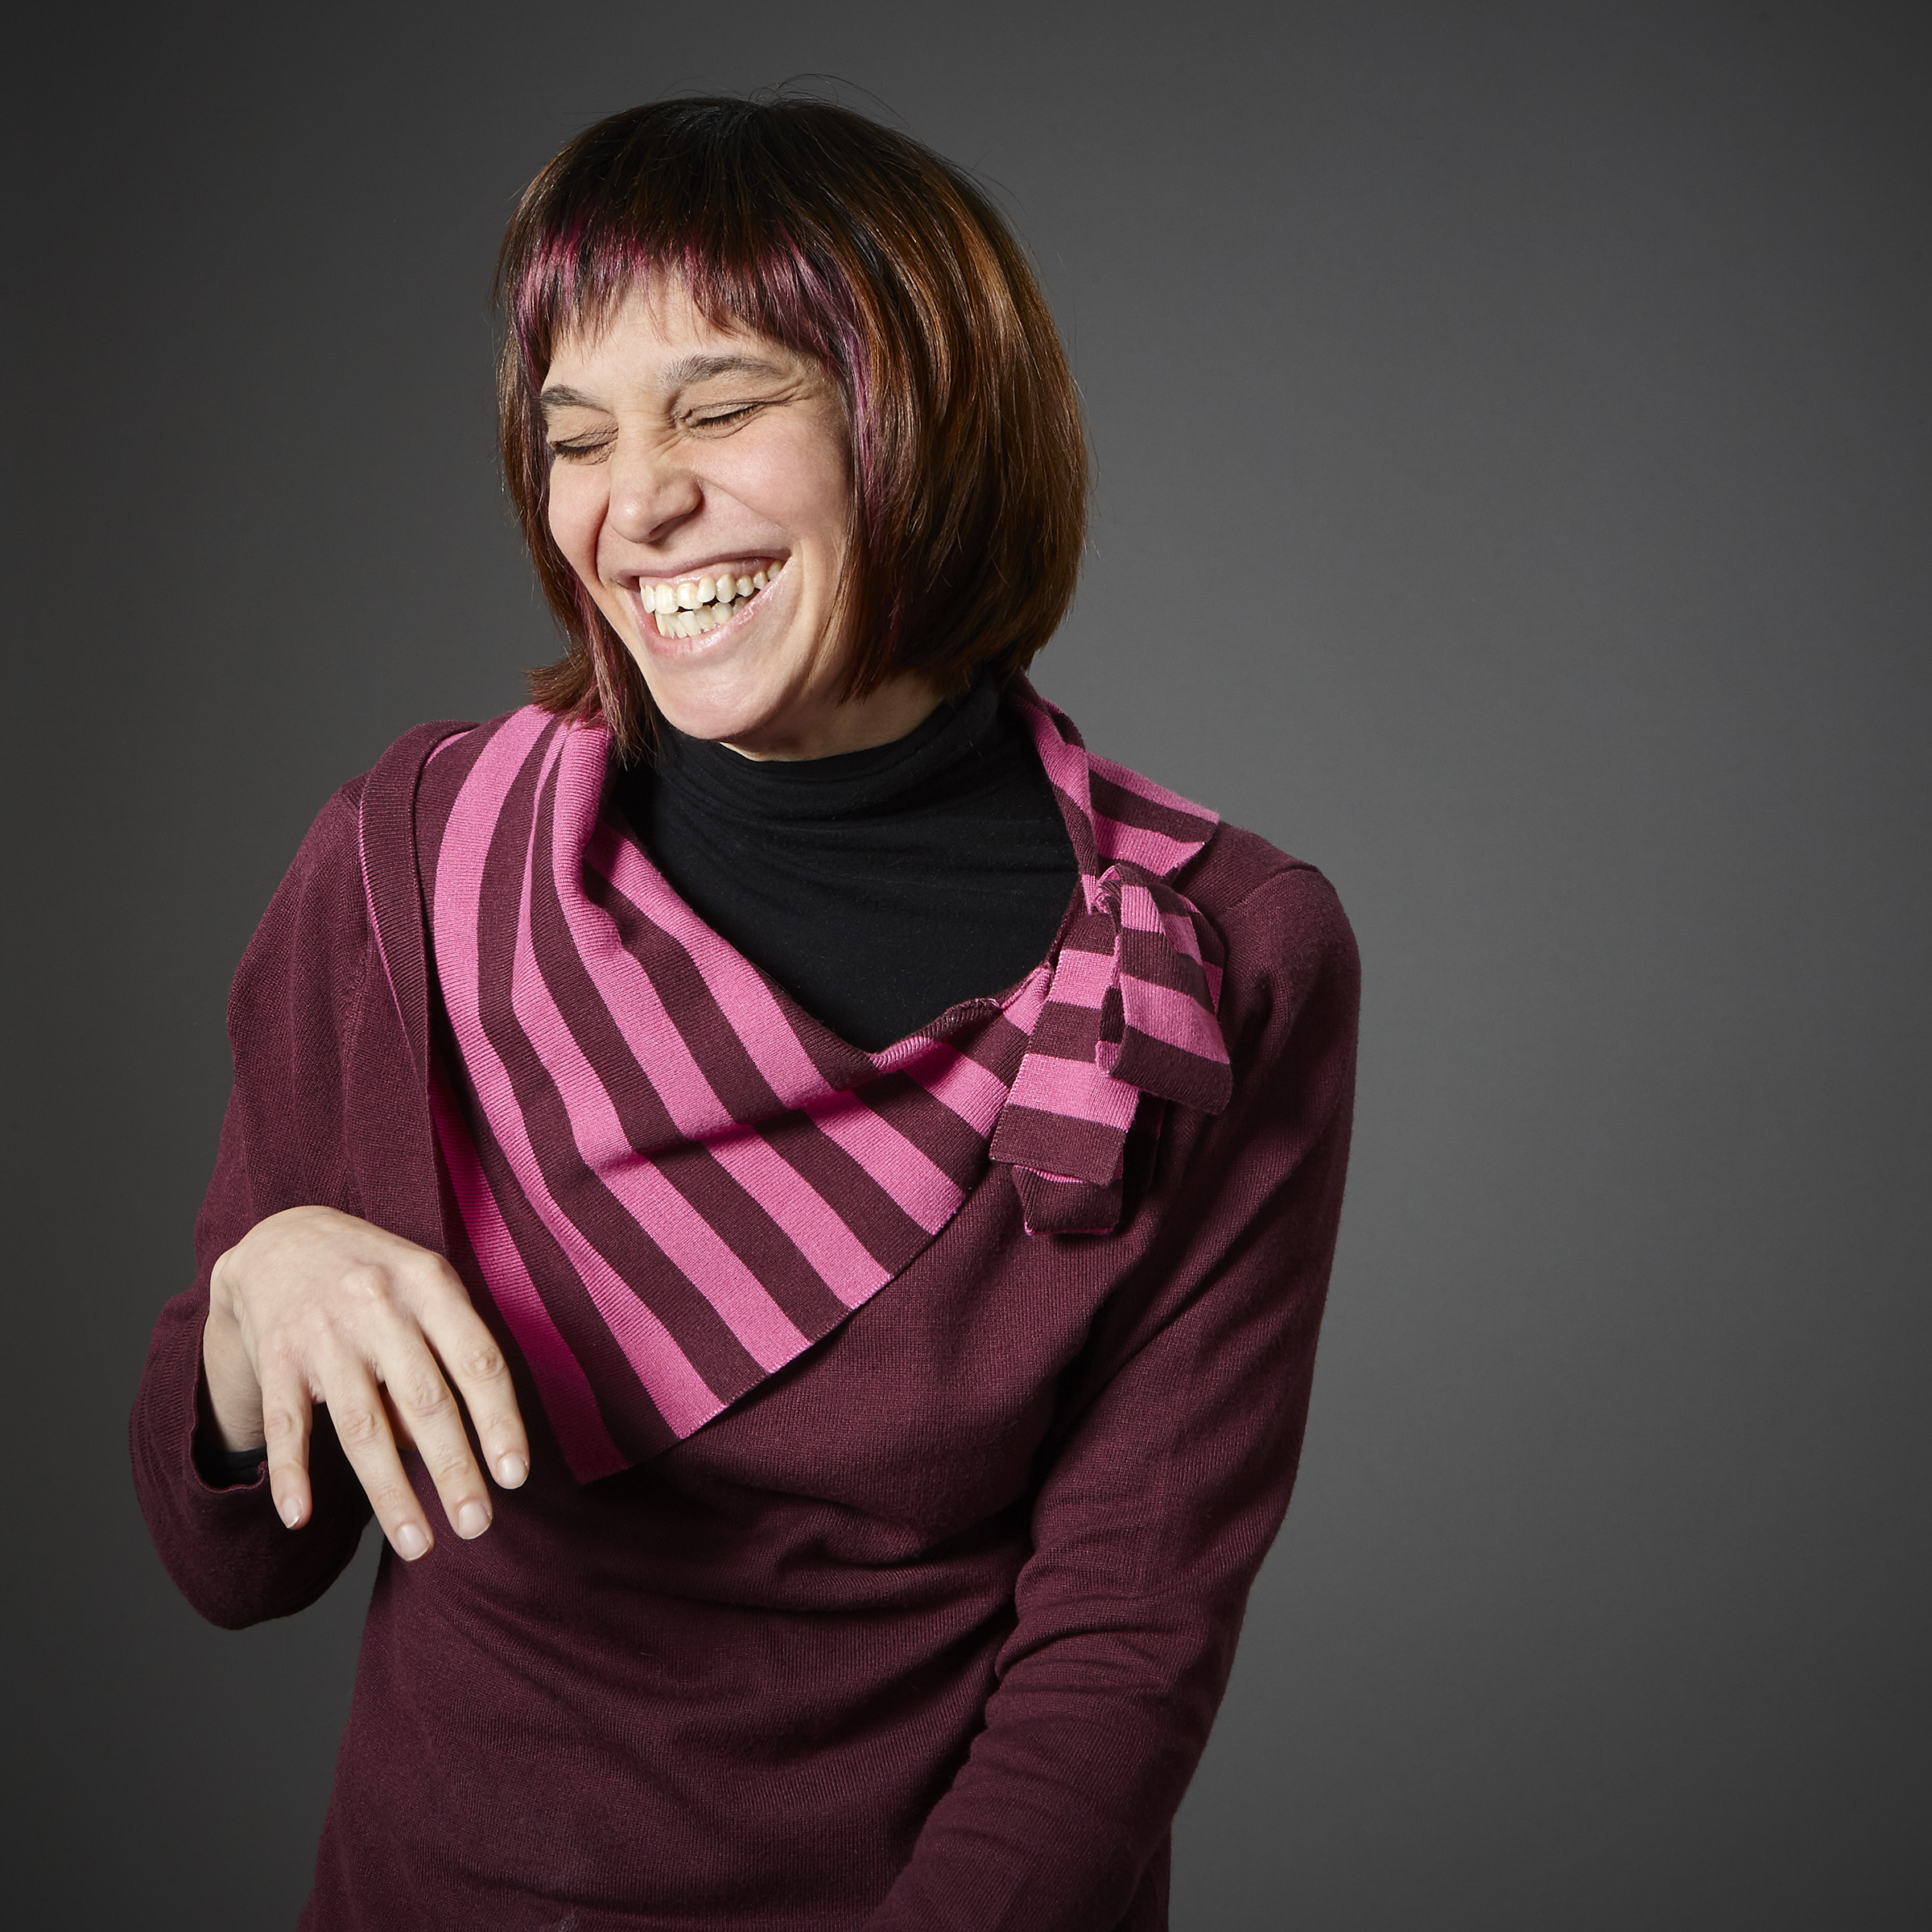 Maria, one of our adult participants, sits for a studio portrait directed by a peer. Her auburn and purple hair, styled in a chin-length bob, beautifully matches her purple striped sweater. She is eyes-closed in a natural smile, looking off slightly to the side.